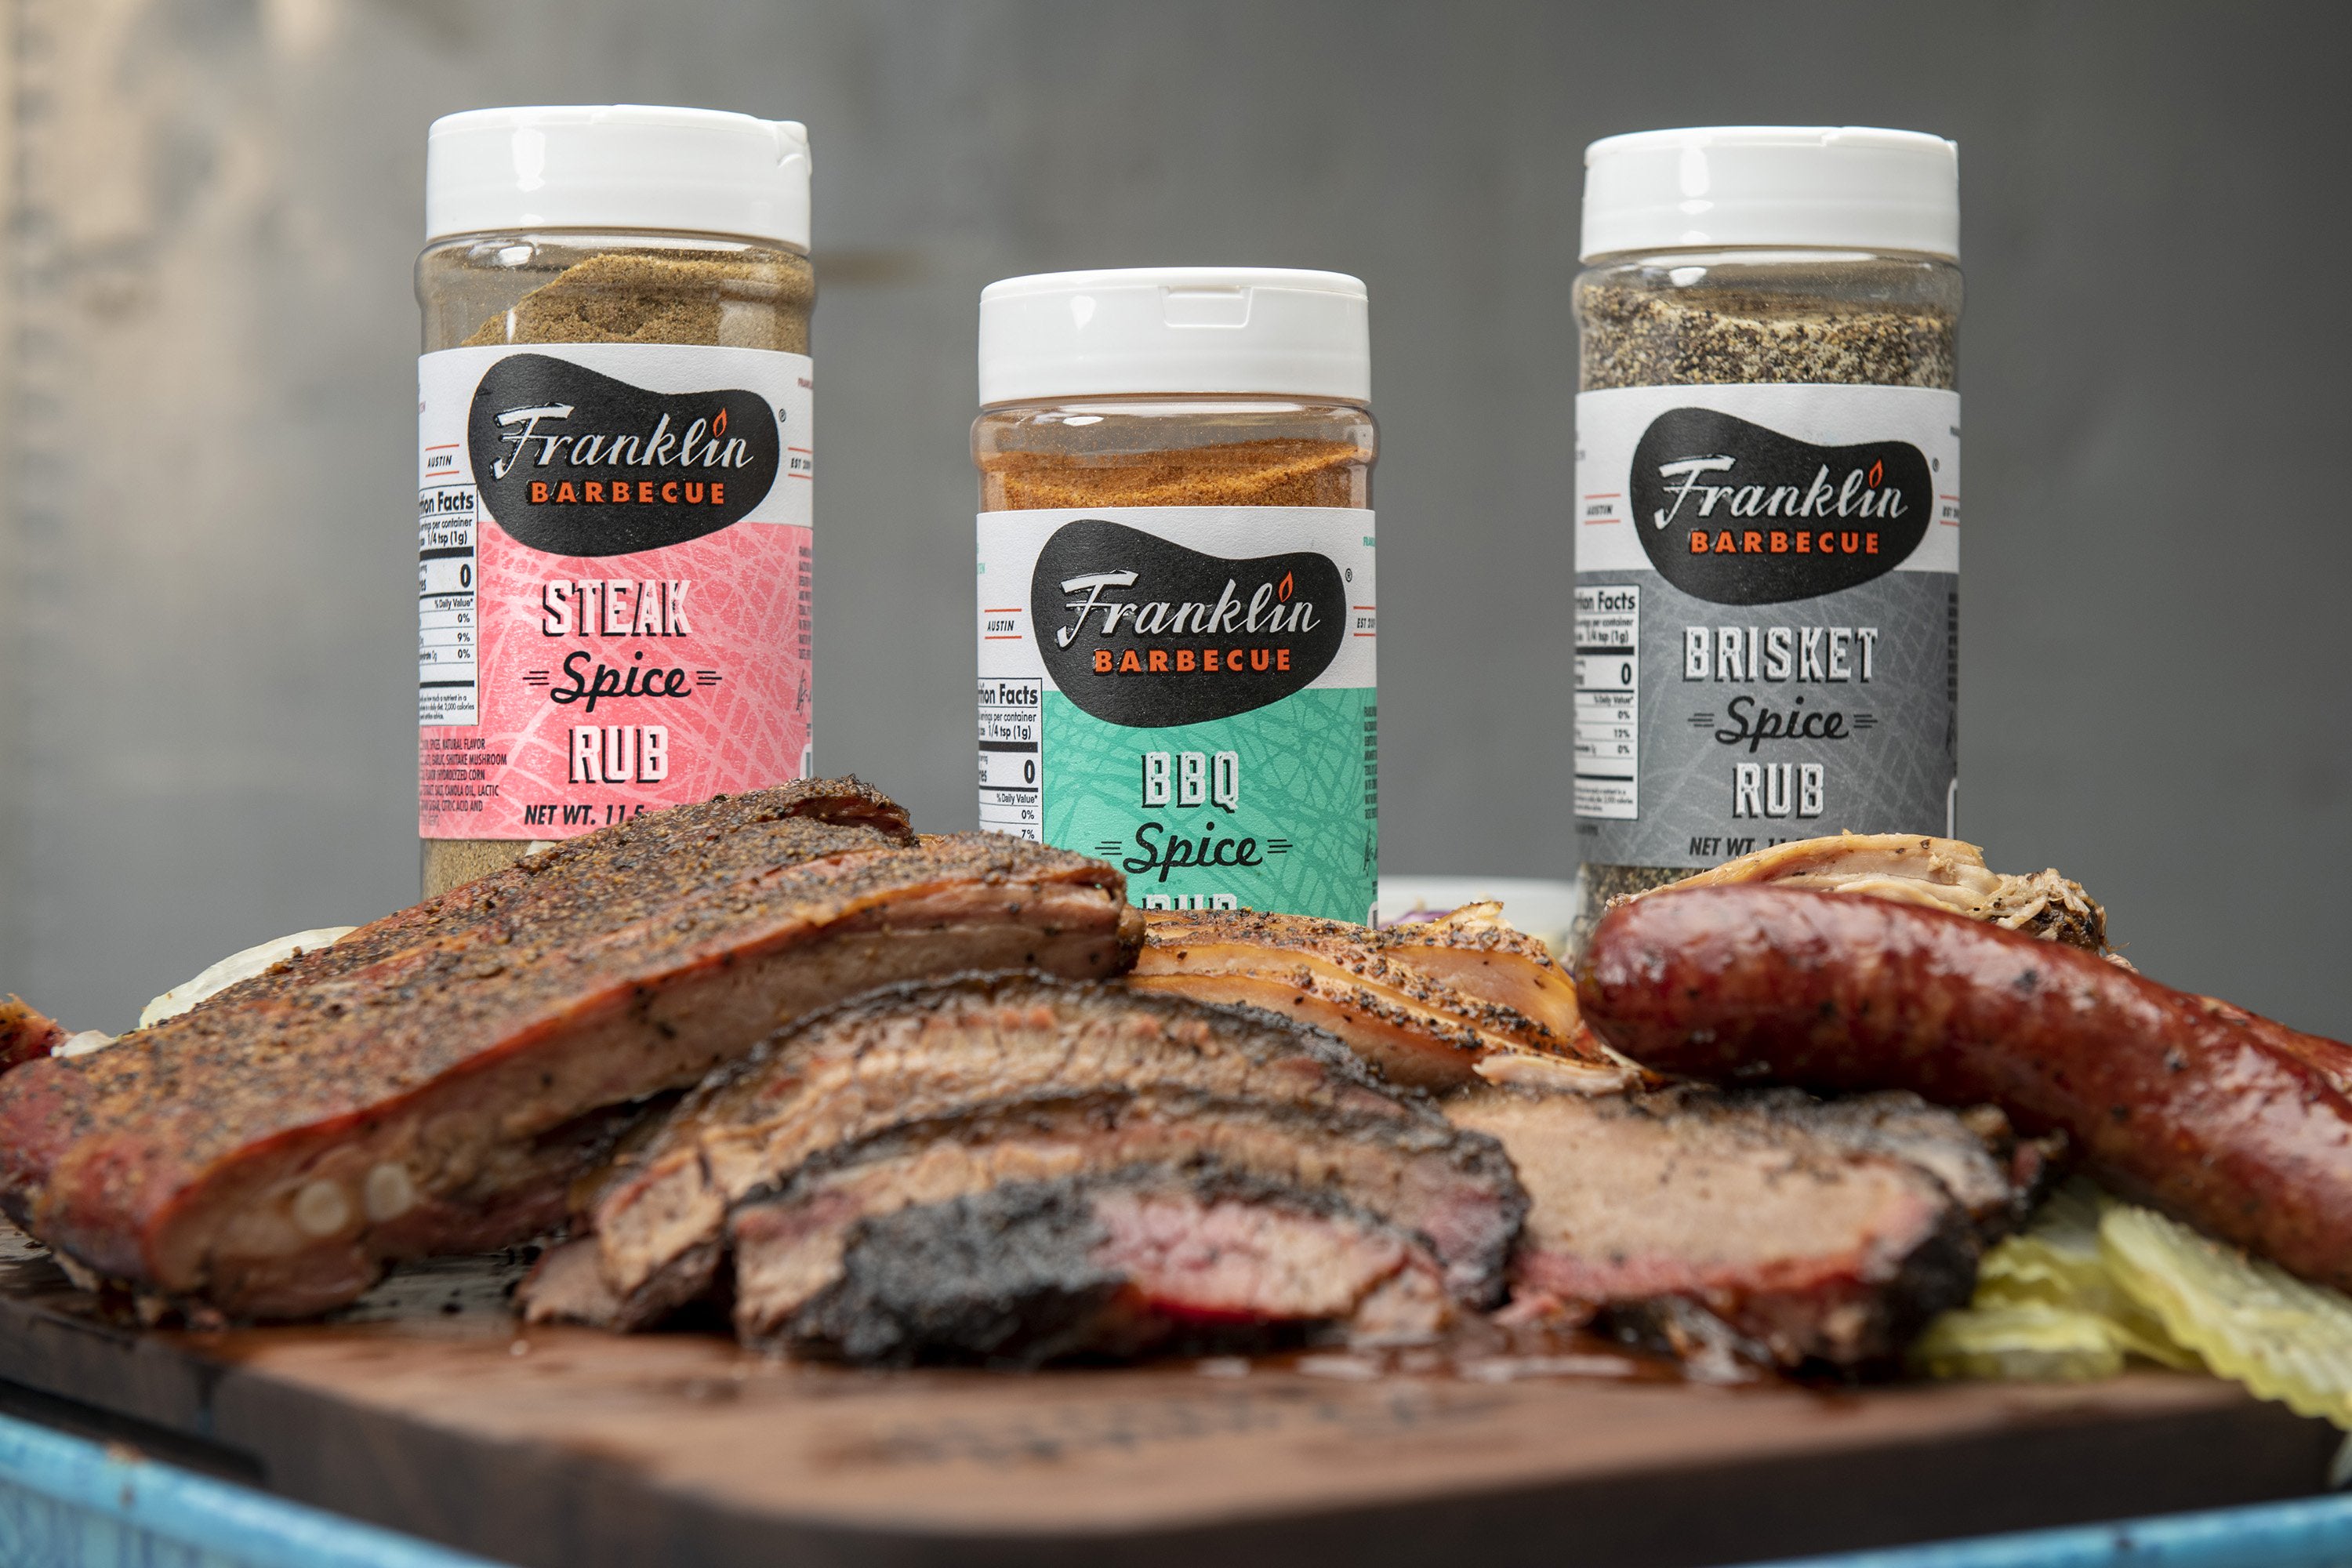 All three spice rubs displayed behind a large platter of barbecue.